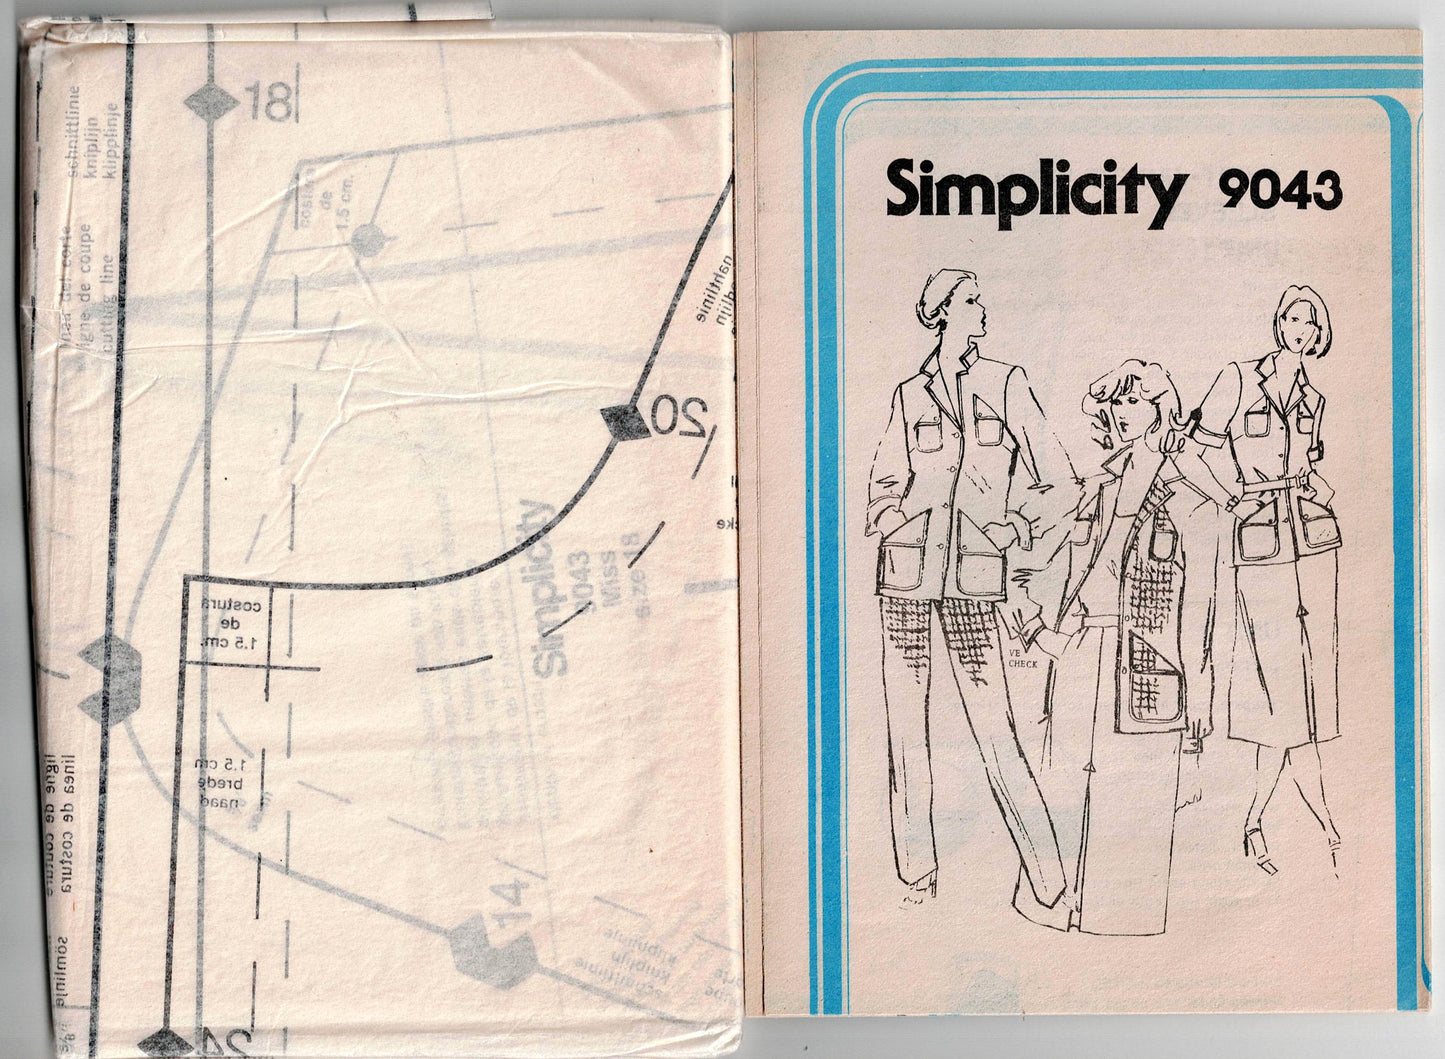 Simplicity 9043 Womens Cargo Jacket Skirt & Pants 1970s Vintage Sewing Pattern Size 18 Bust 40 inches